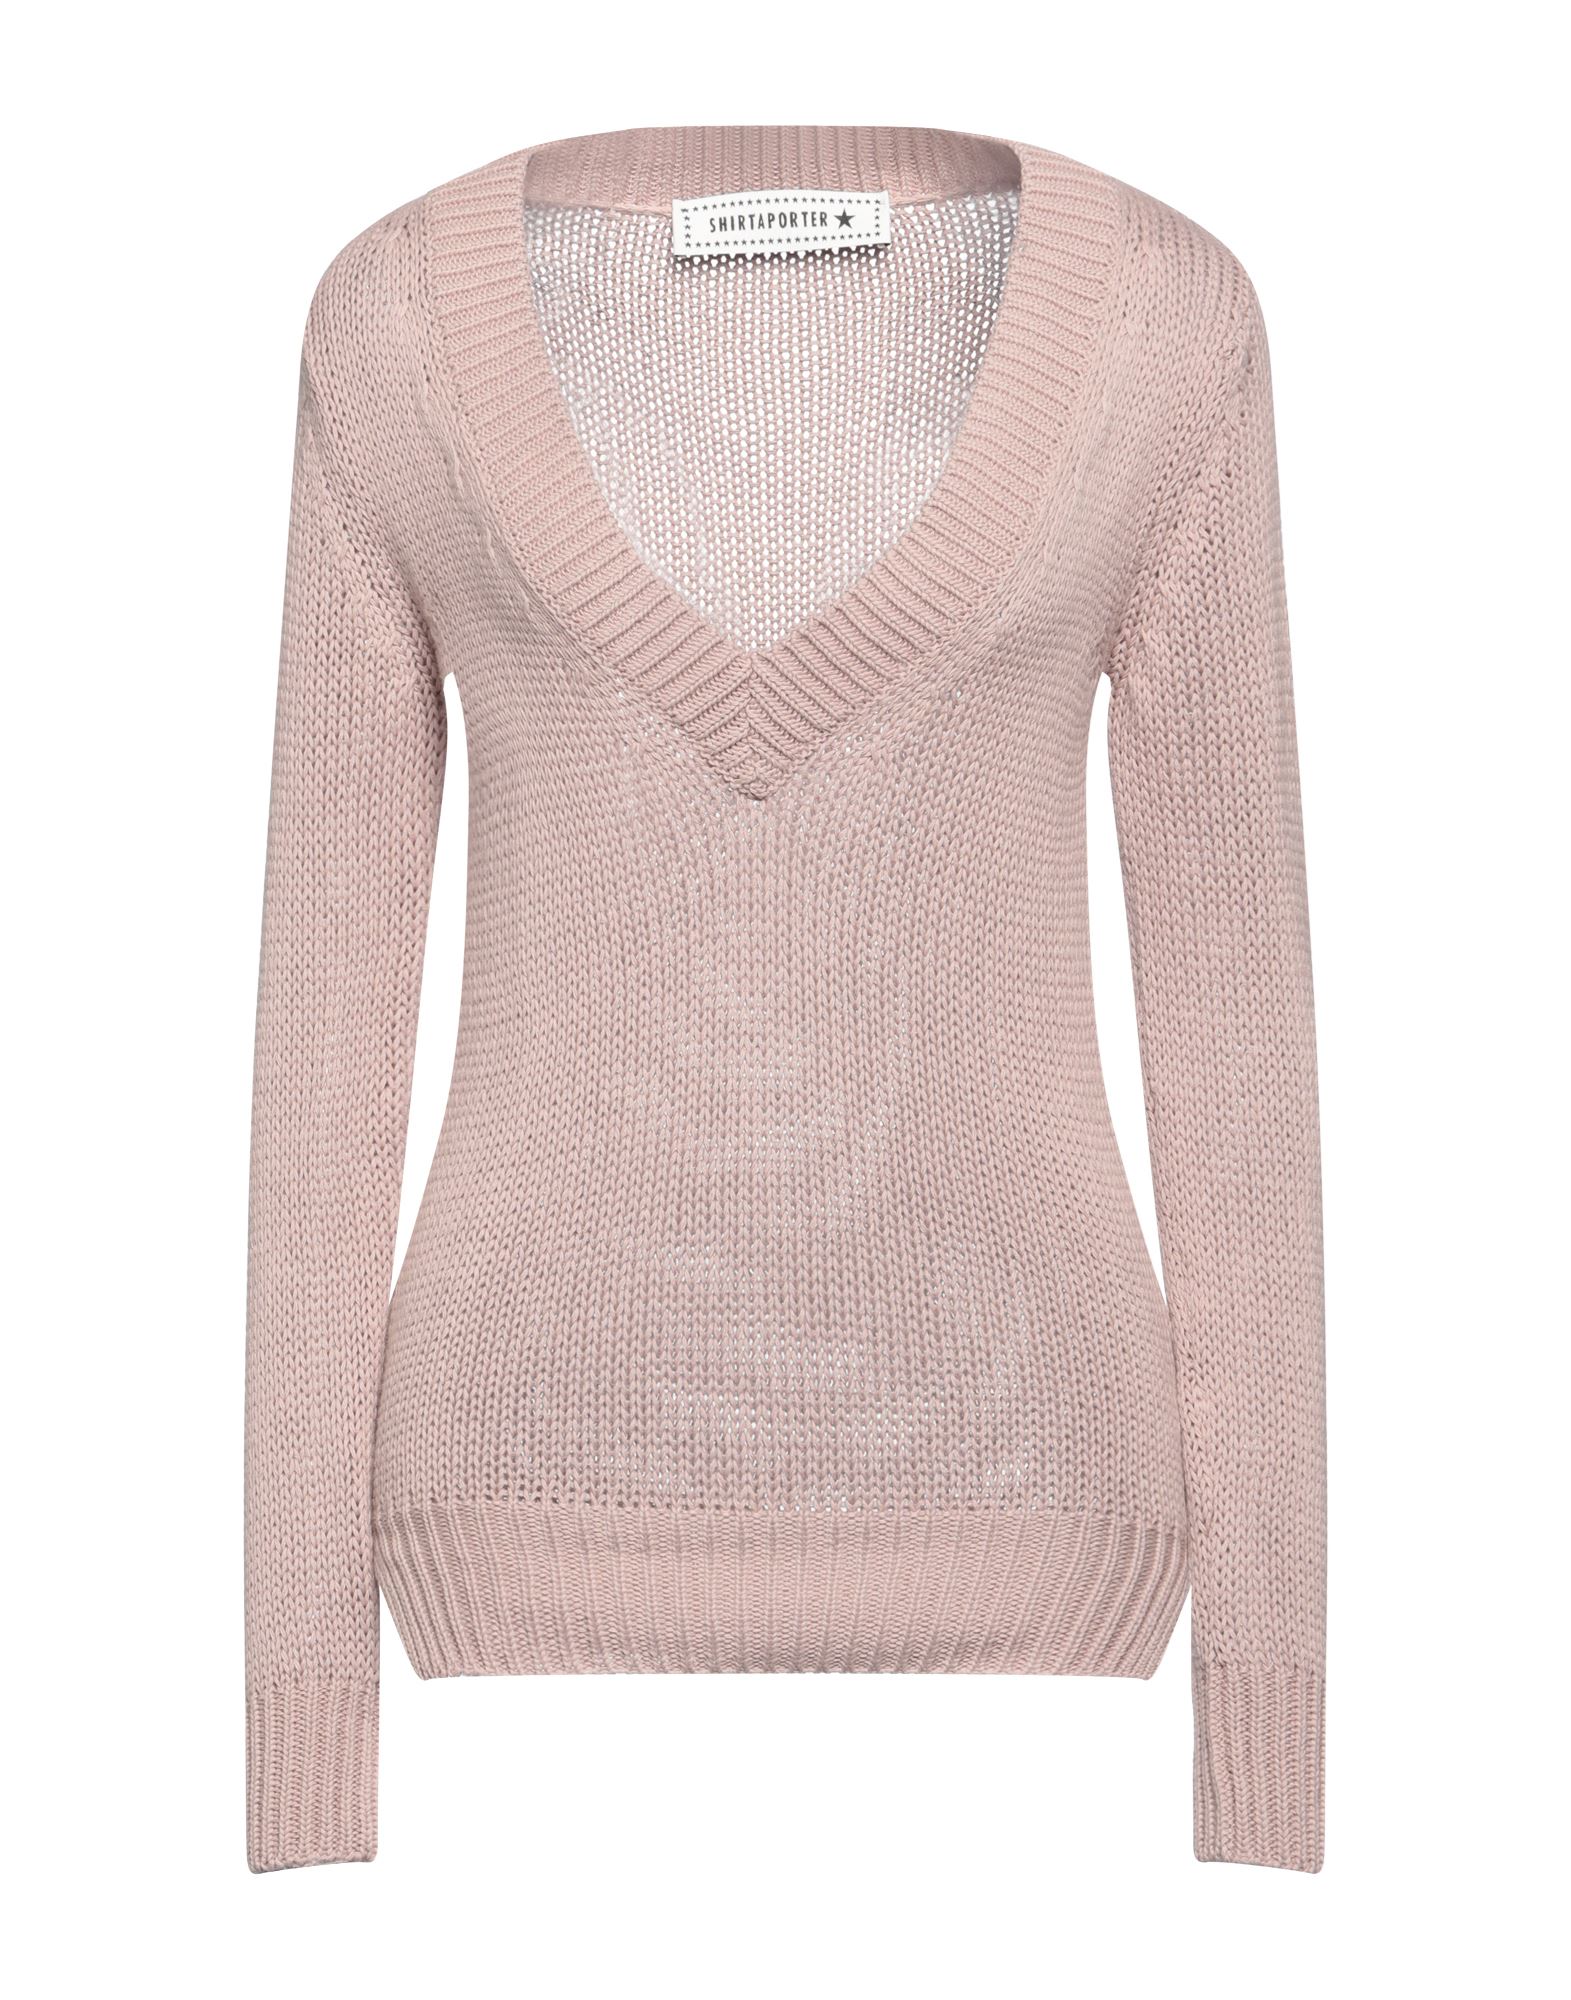 Shirtaporter Sweaters In Pink